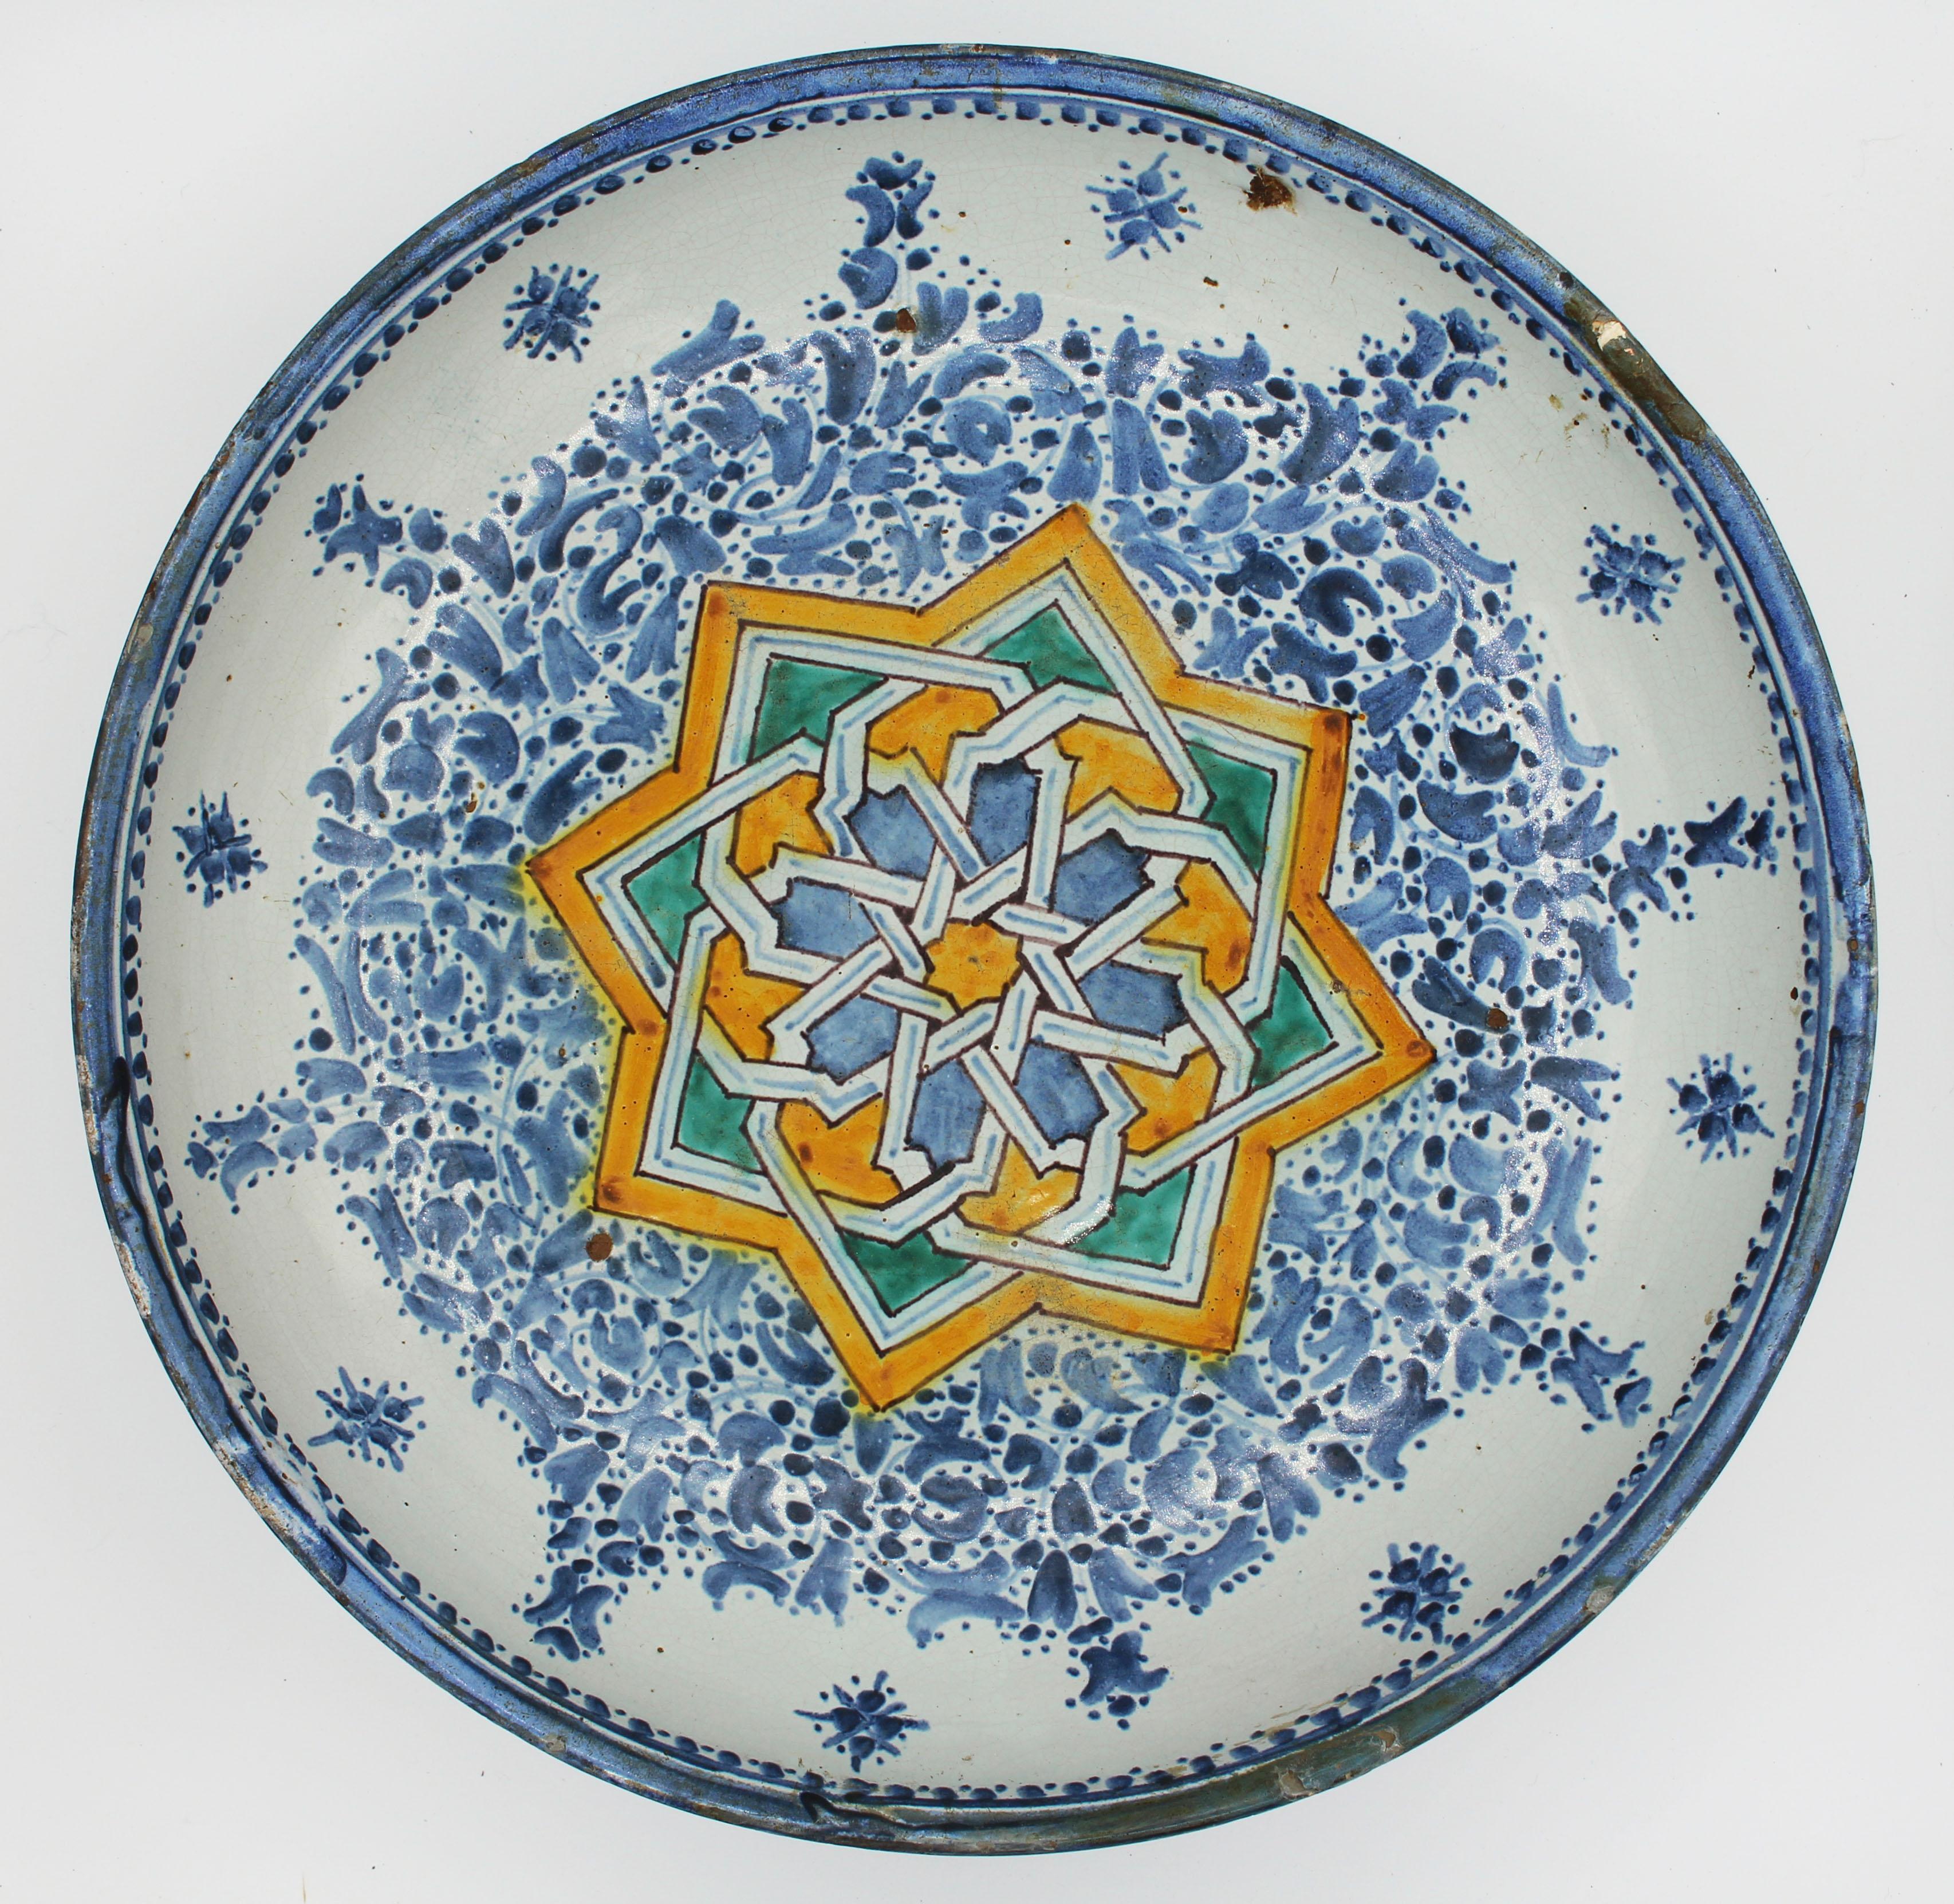 A stunning Spanish or North African faience deep bowl. 18th century. Well cared for with various old rim repairs typical of the form. Red ware base. 15 1/4